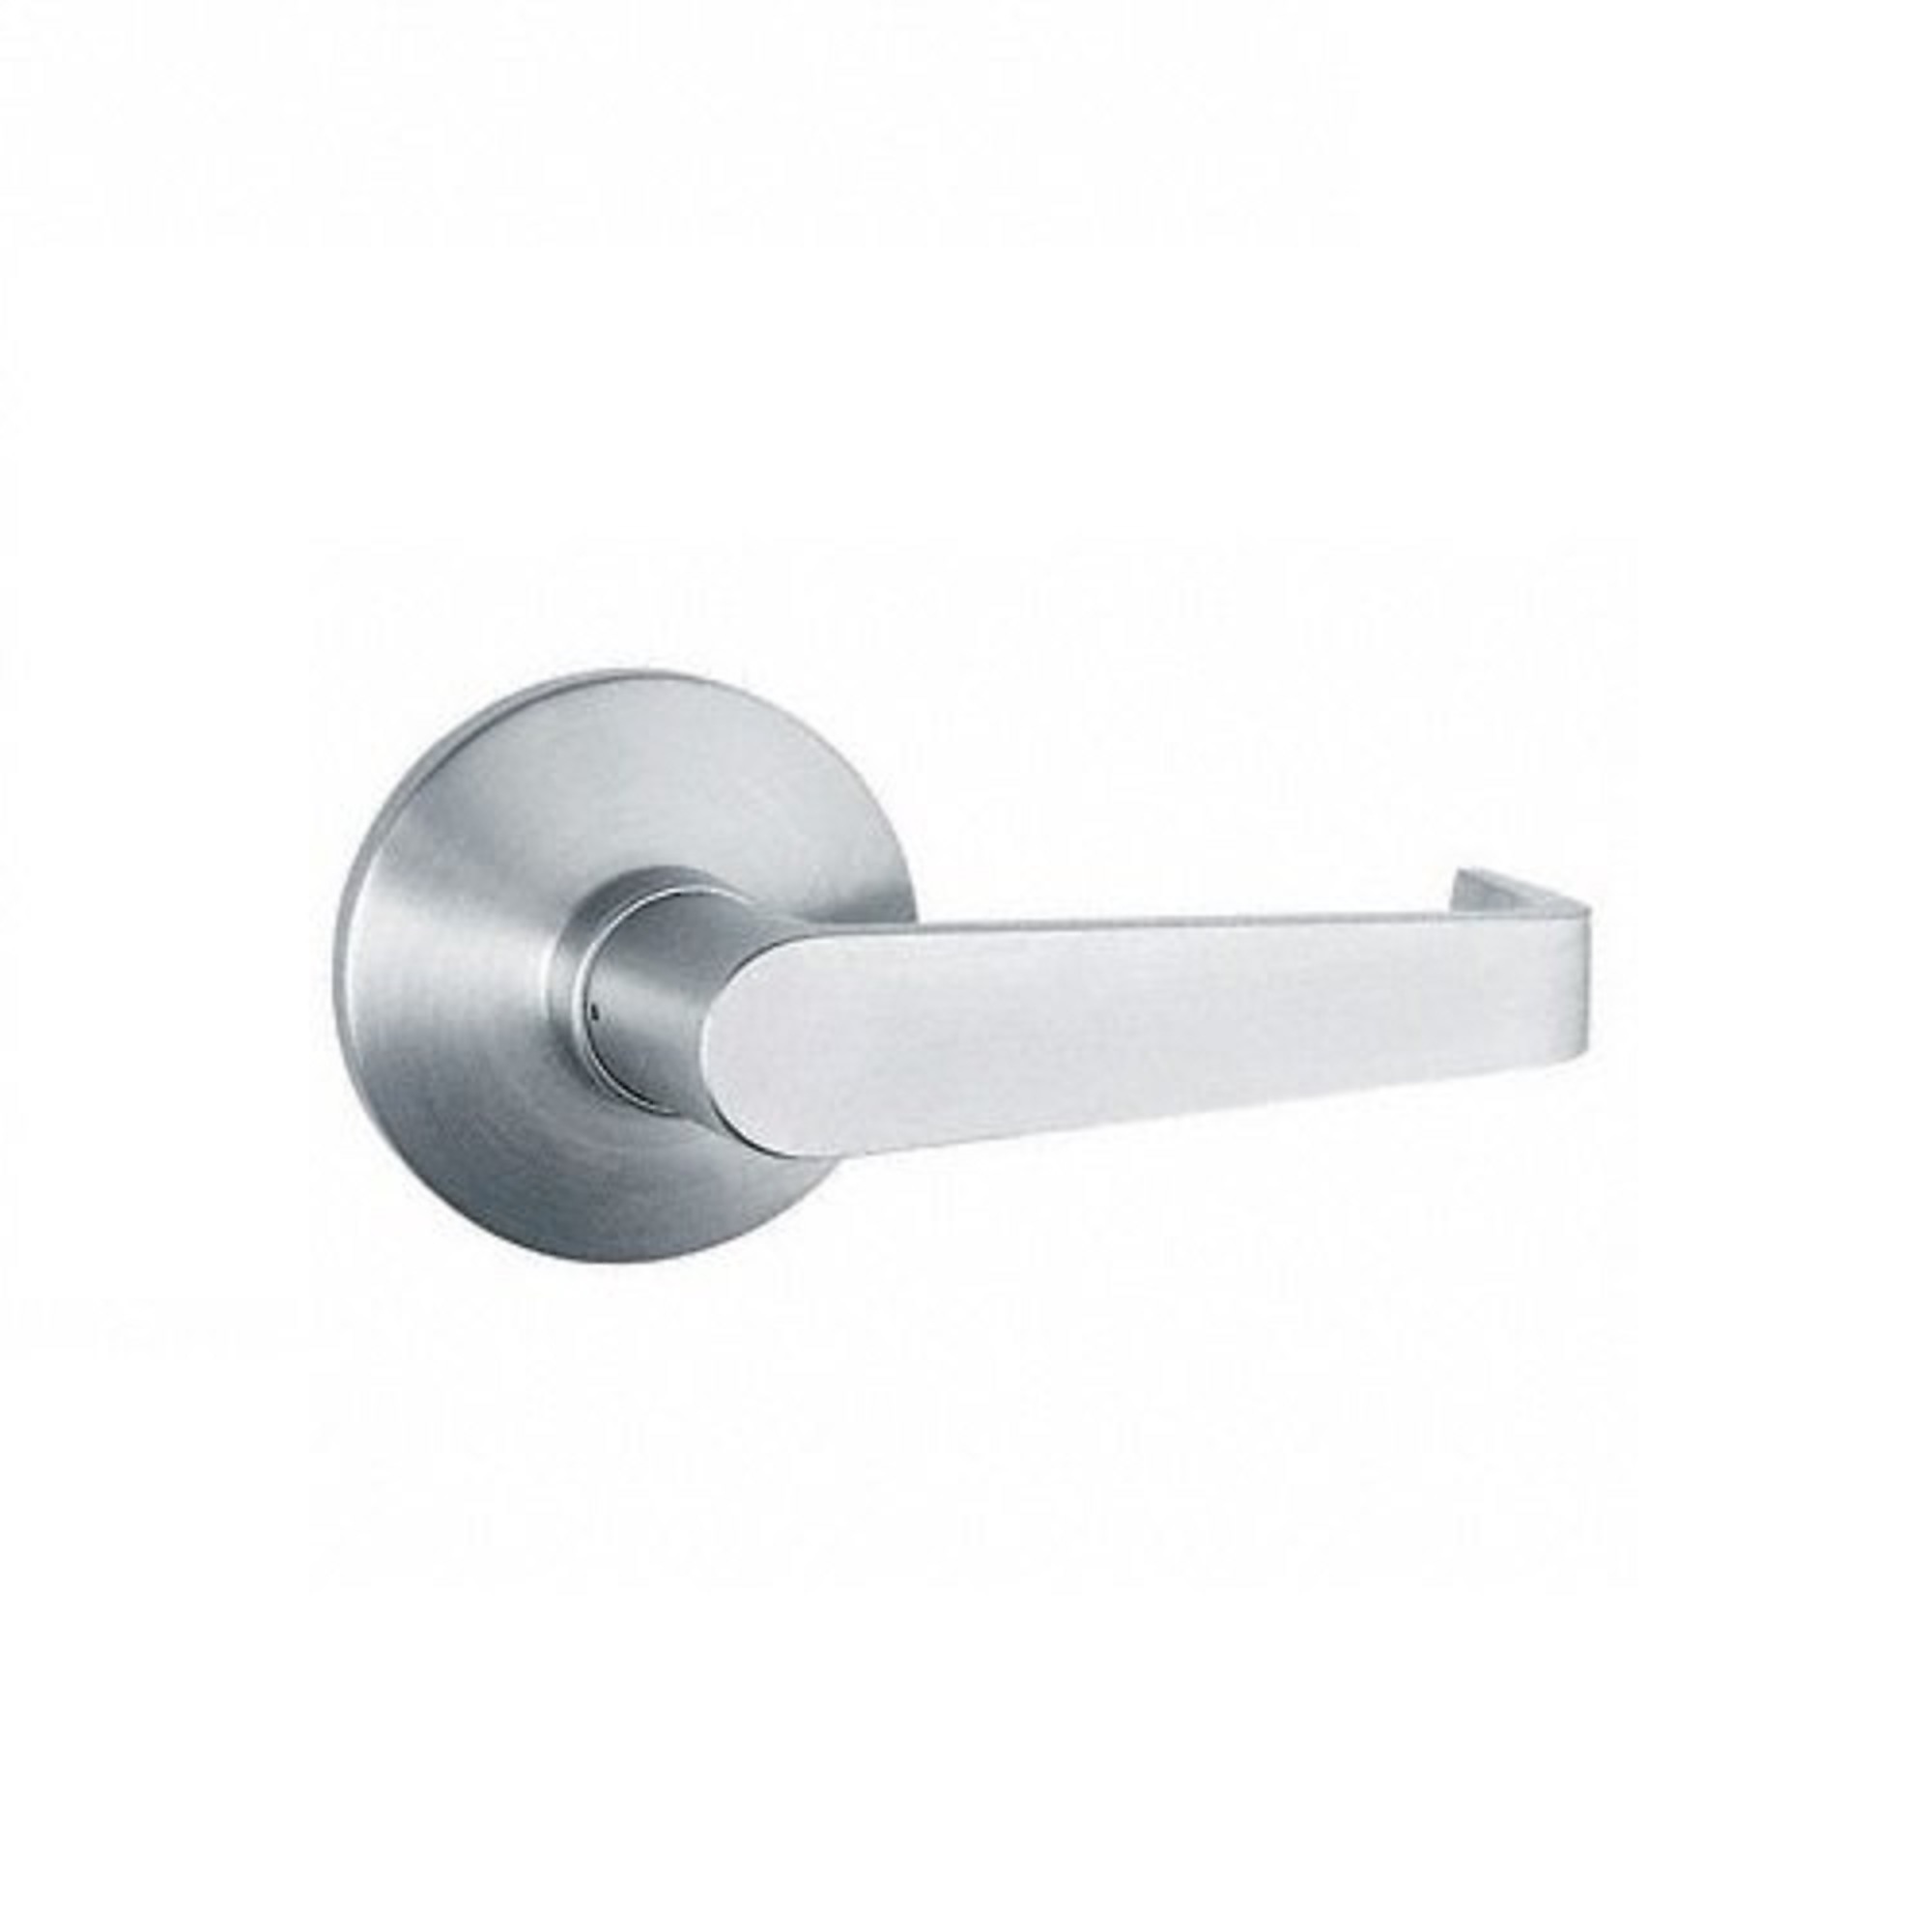 Trans Atlantic, Brushed Chrome Passage Lever Trim for Panic Exit Device, Max. Fits Door Width 48 in, MInch Fits Door Width 36 in, Model ED-LHL510-